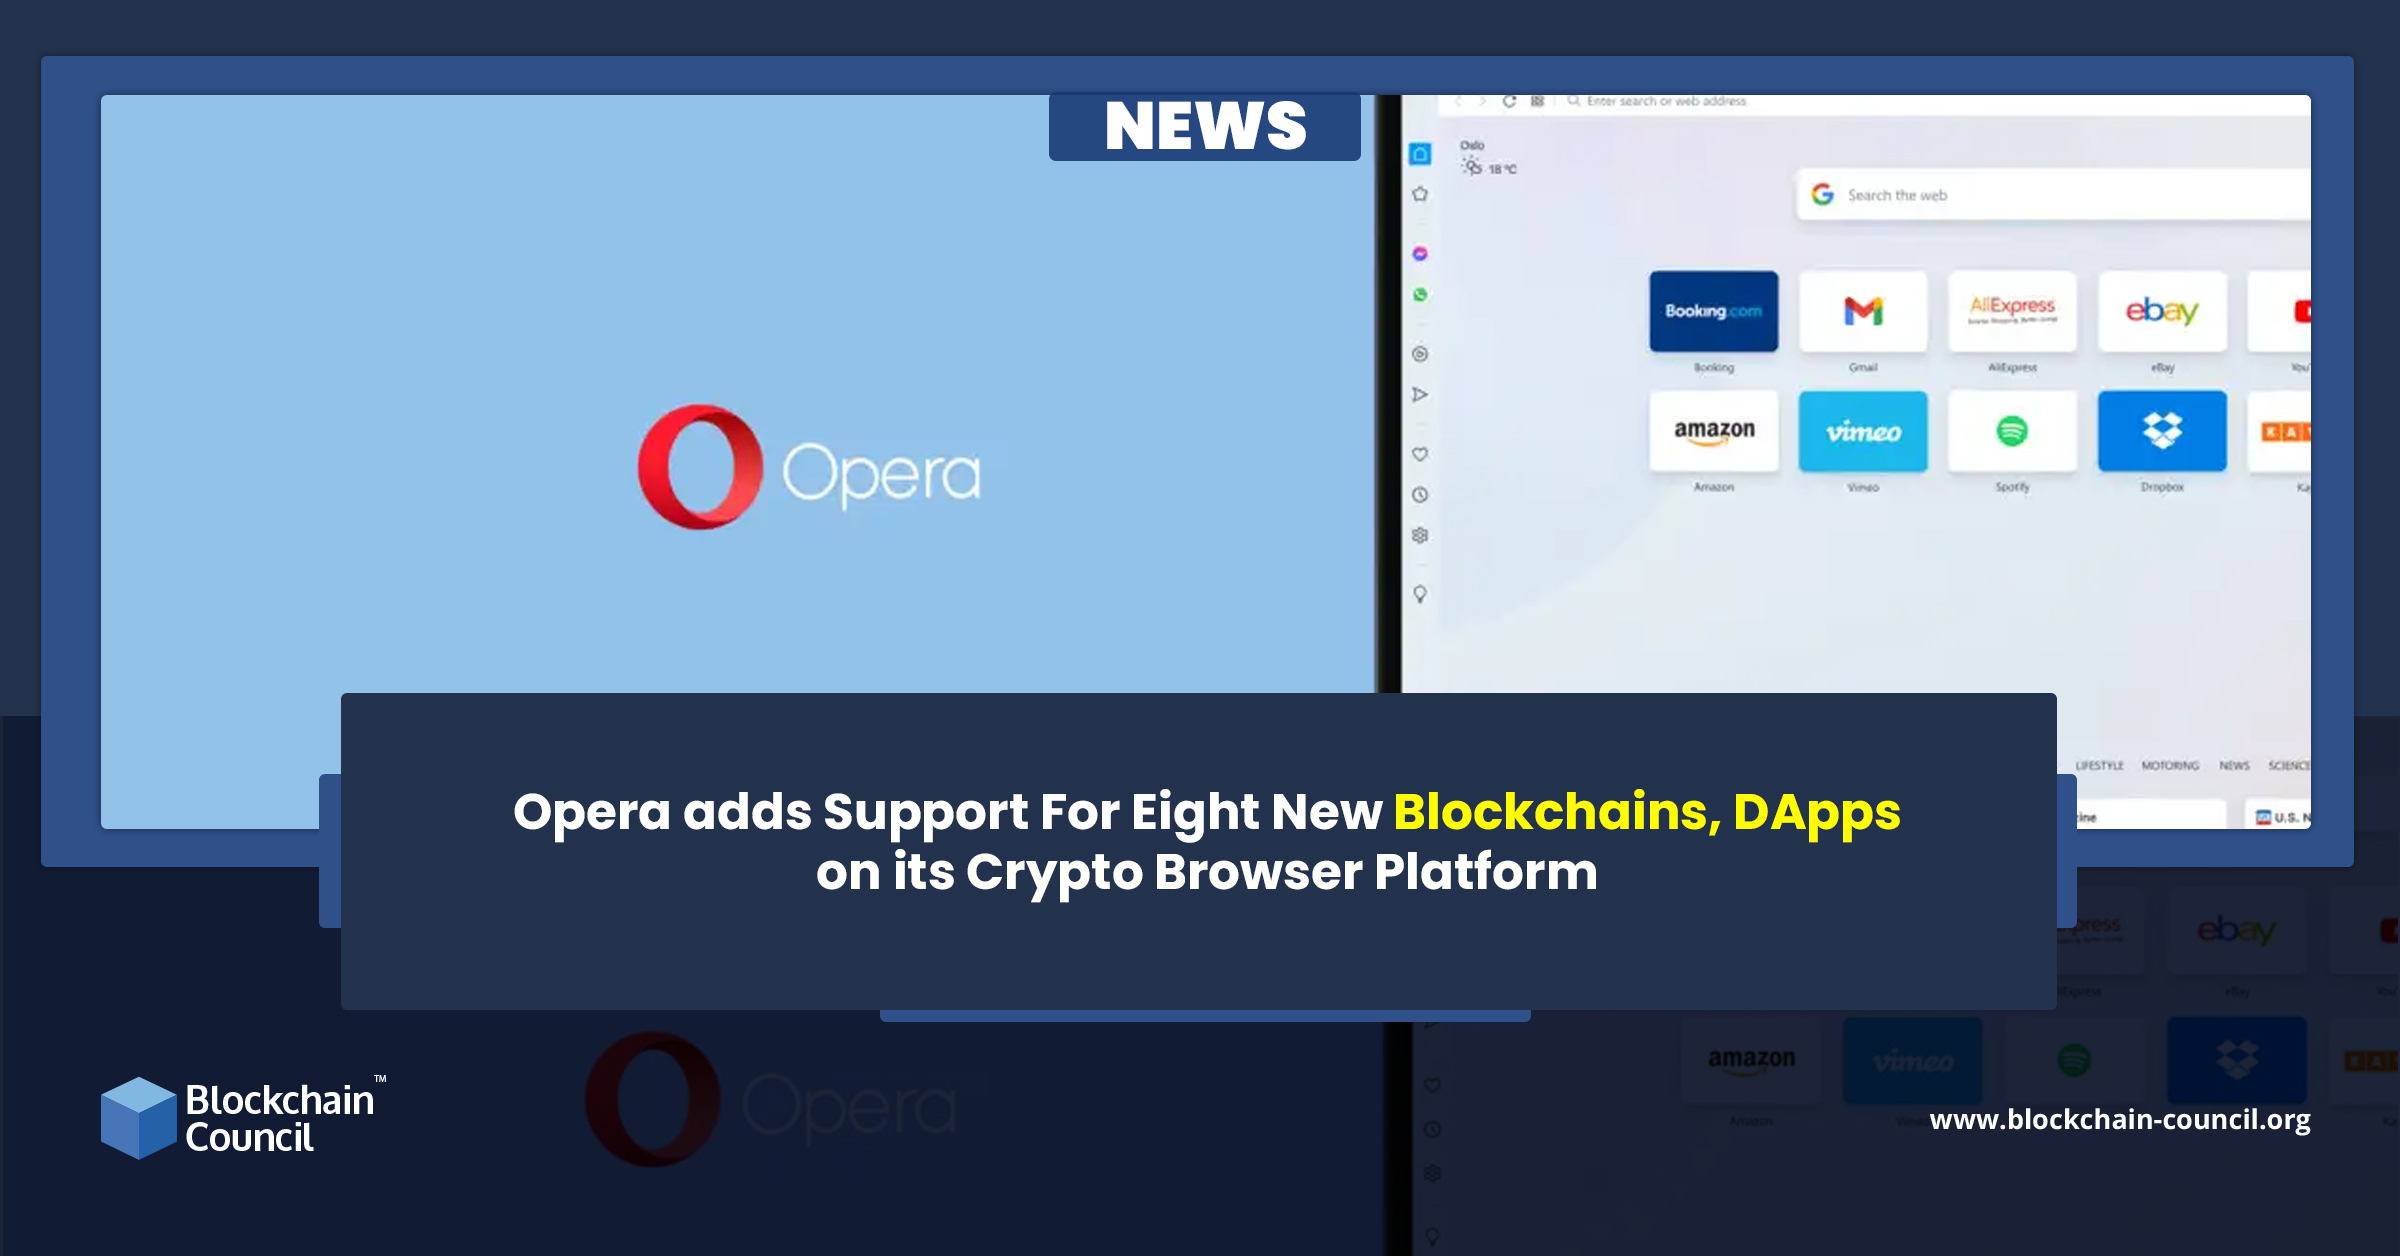 Opera adds Support For Eight New Blockchains, DApps on its Crypto Browser Platform